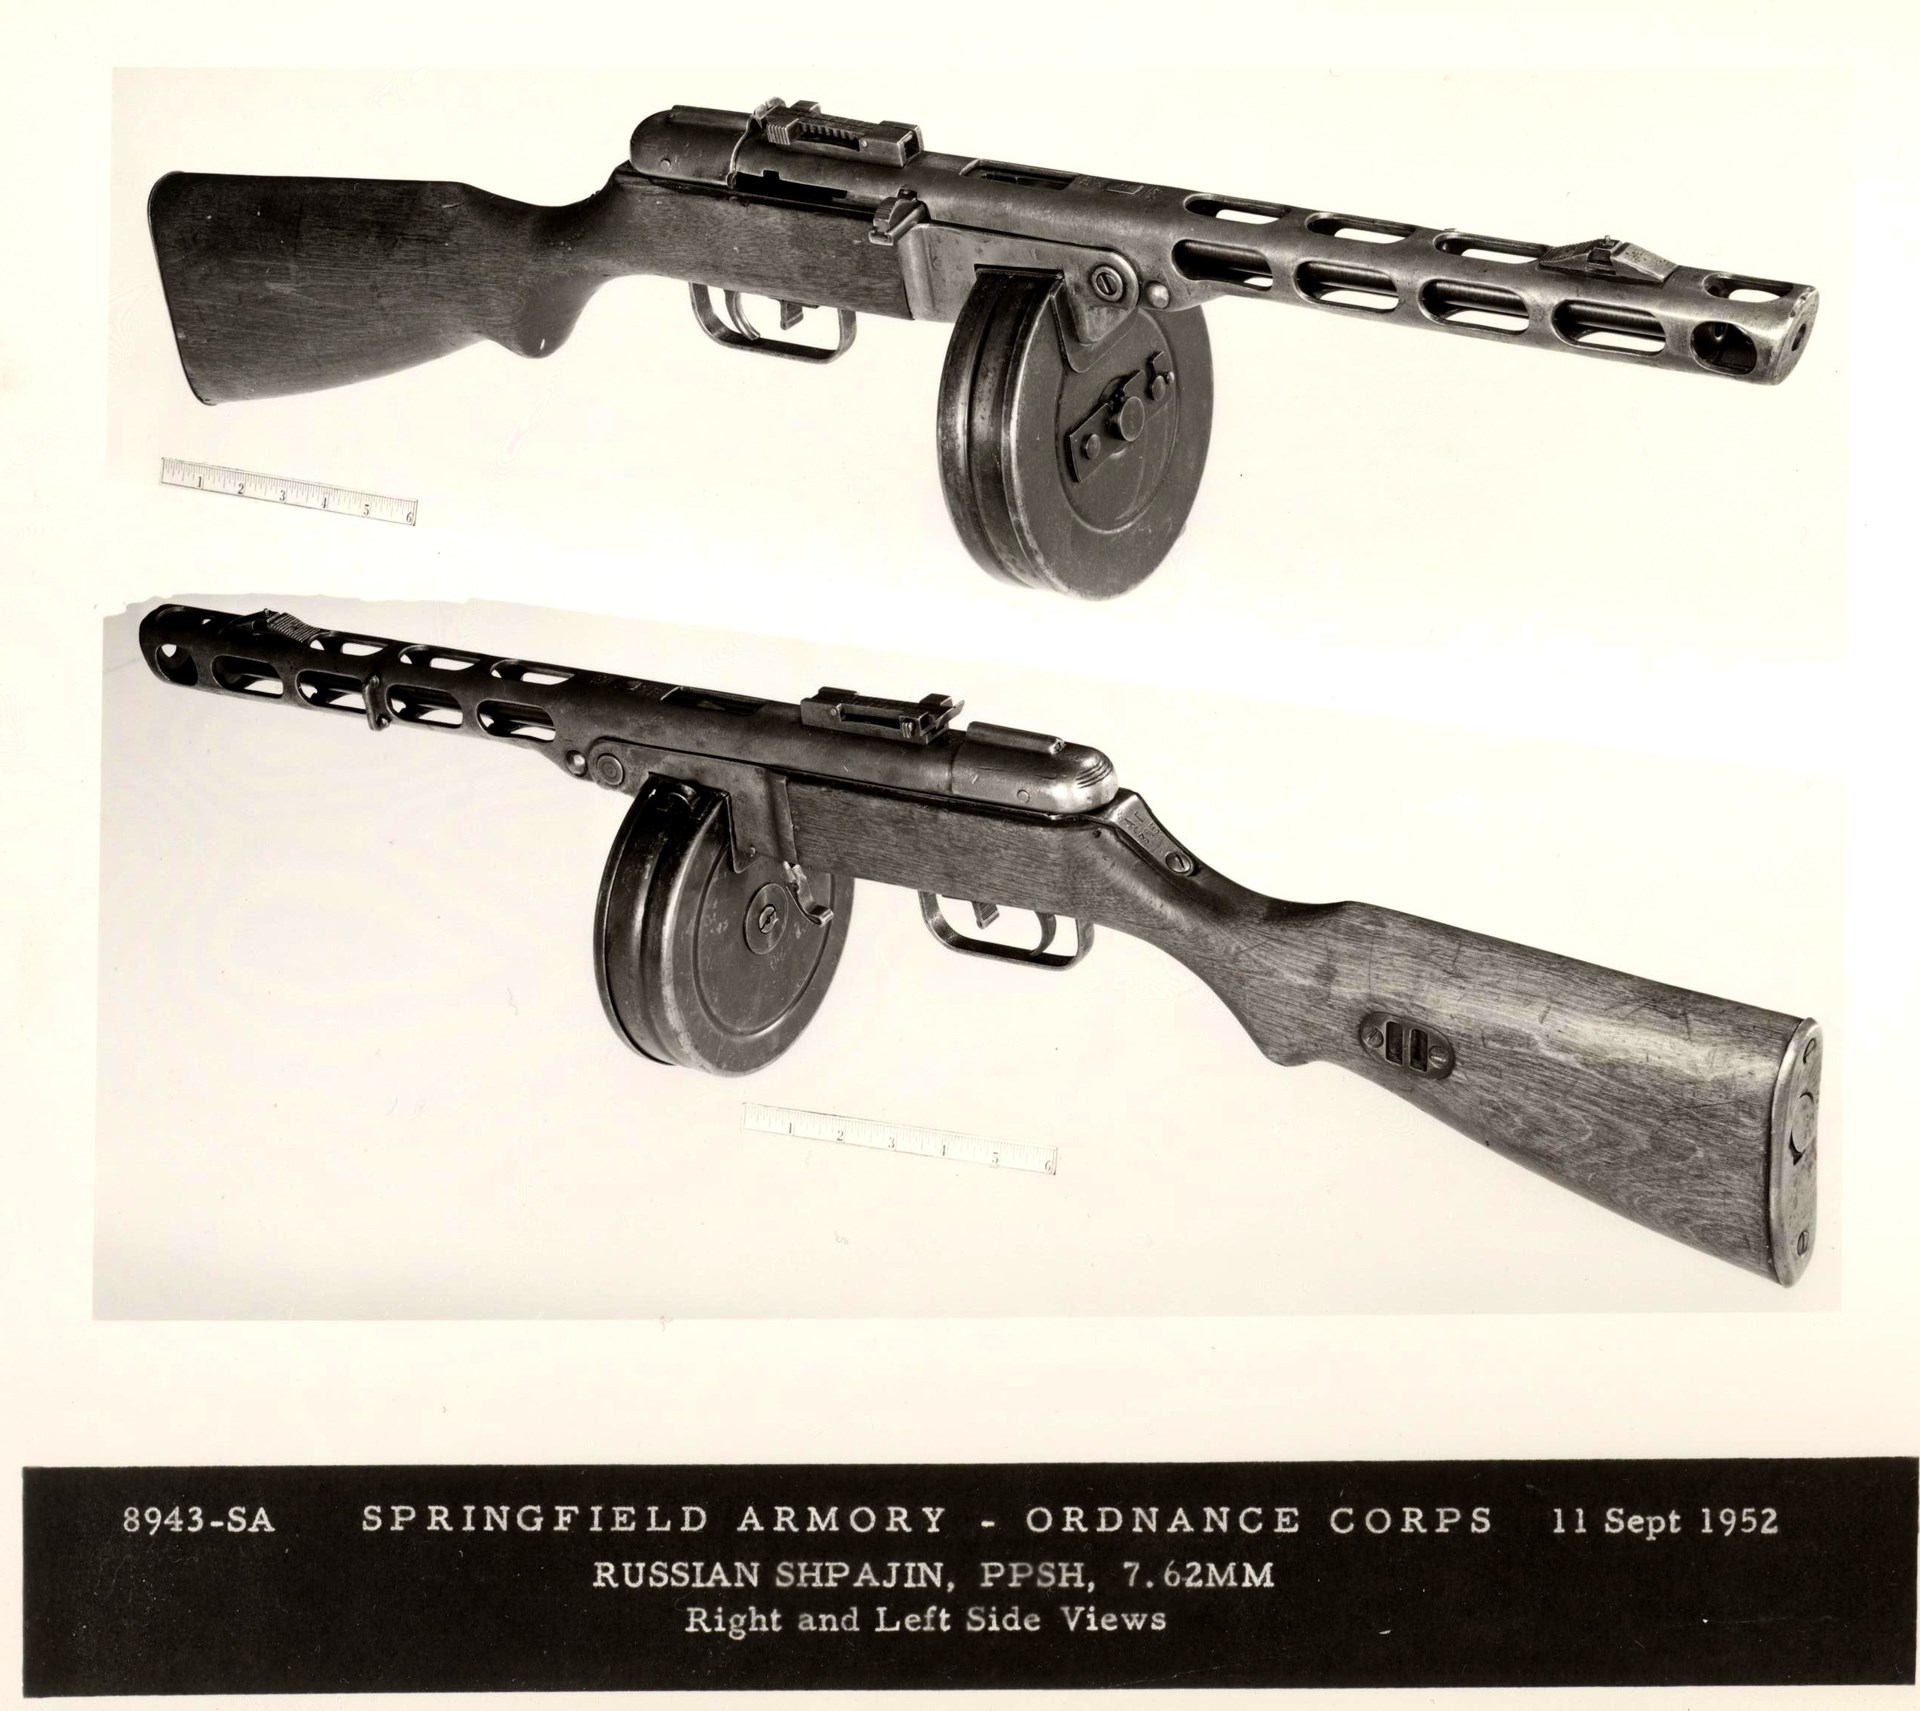 The partisan's best friend, the PPSh-41 SMG equipped with a 71-round drum magazine. The simple PPSh offered tremendous short-range firepower. Springfield Armory